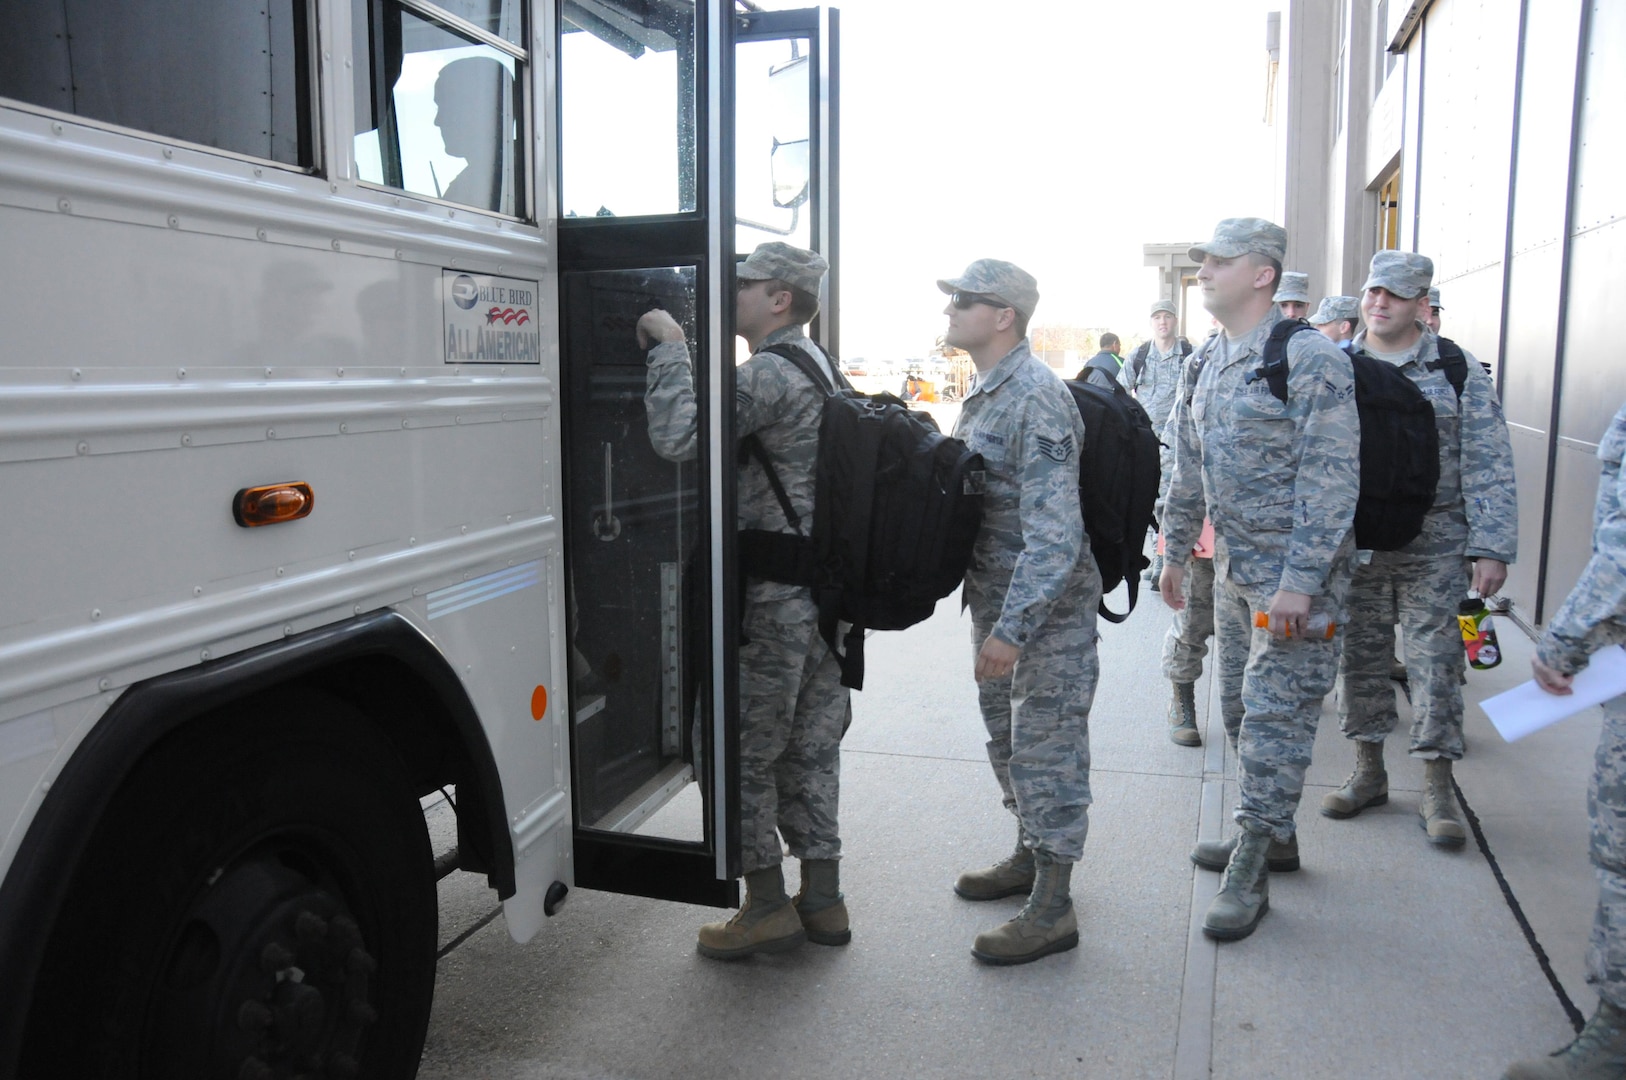 Airmen assigned to the 134th Air Control Squadron climb aboard buses and deploy from McConnell Air Force Base in support of operations Nov. 11, 2015. The squadron's departure was part of a much larger mobilization of the 184th Intelligence Wing that deployed members to locations all over the world, making it one of the largest deployments in the wing's recent history.